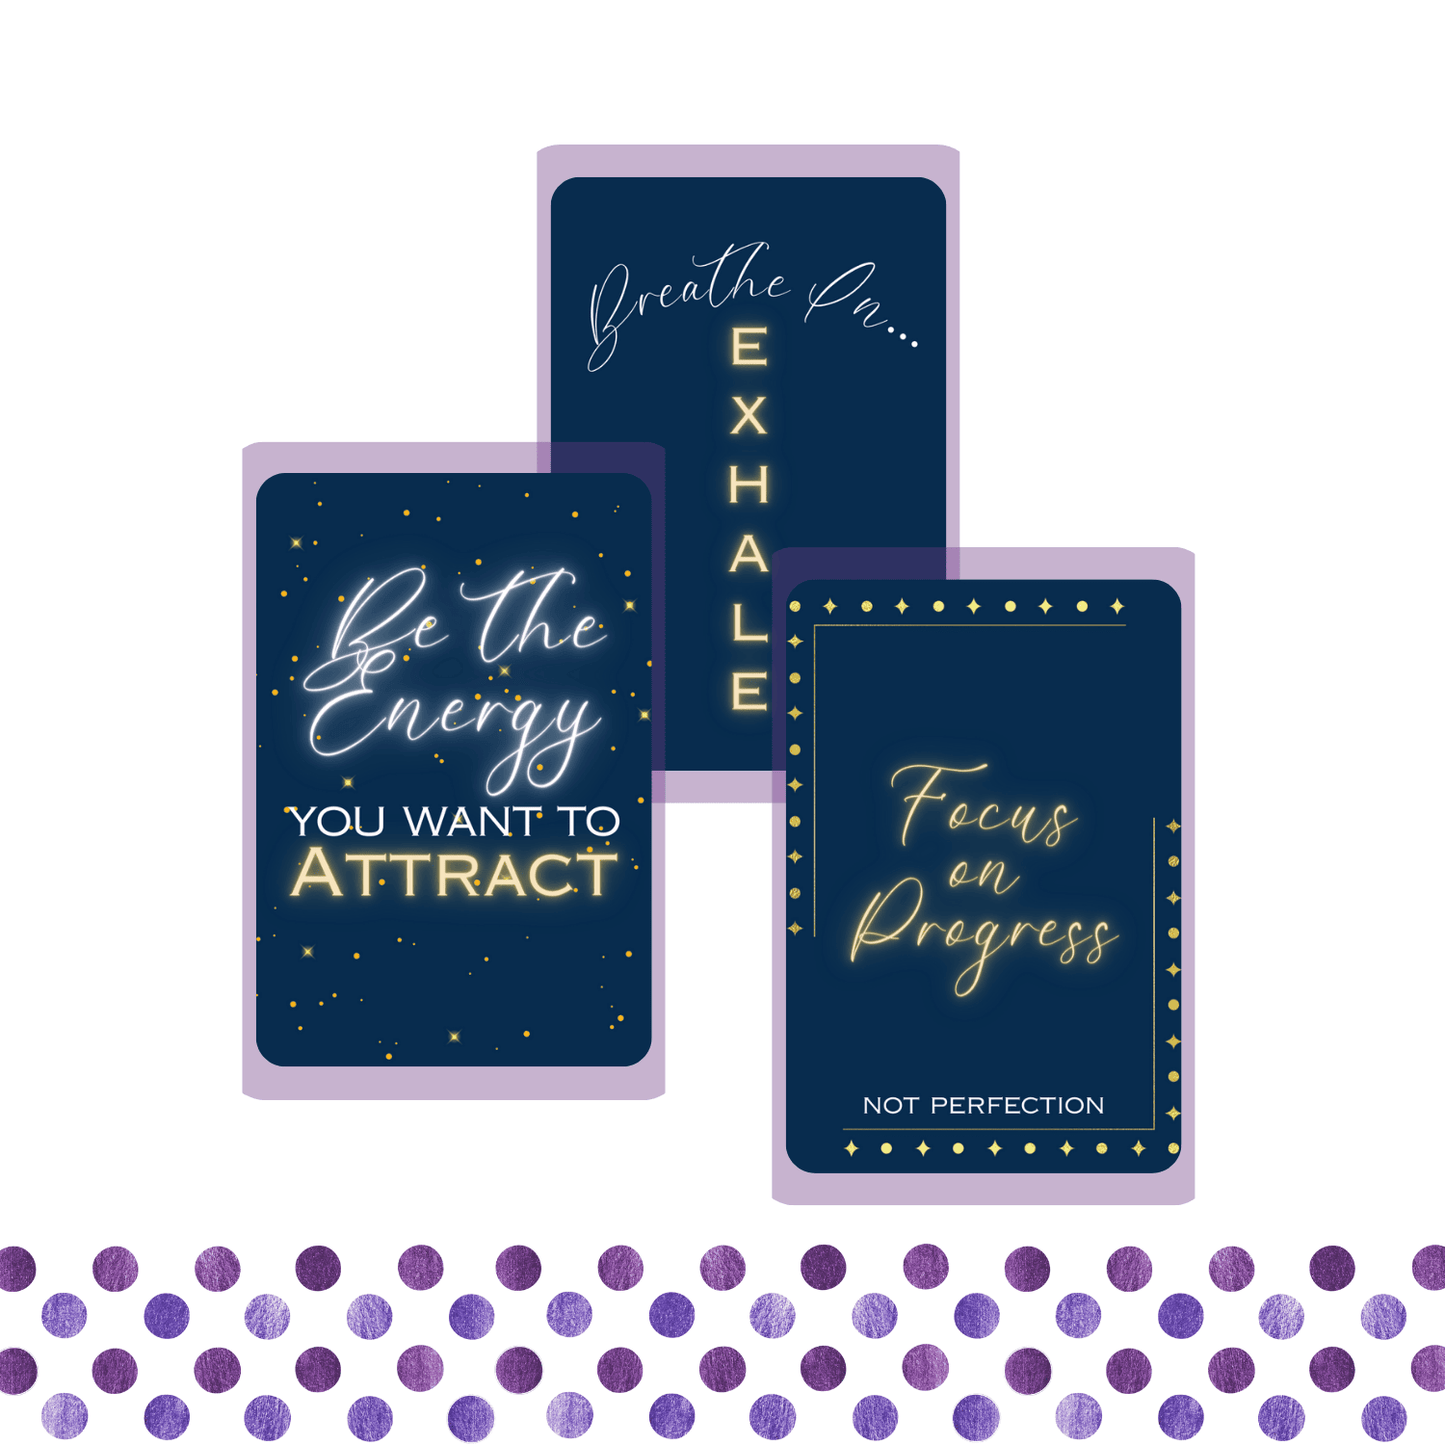 Title image is a spread of three cards from the beautiful Be Empowered Printable Card Deck by Patty Rose in navy blue and gold foil_Breath in... Exhale_Be the Energy you want to attract_Focus on progress not perfection_Polka Dot Patty Shop